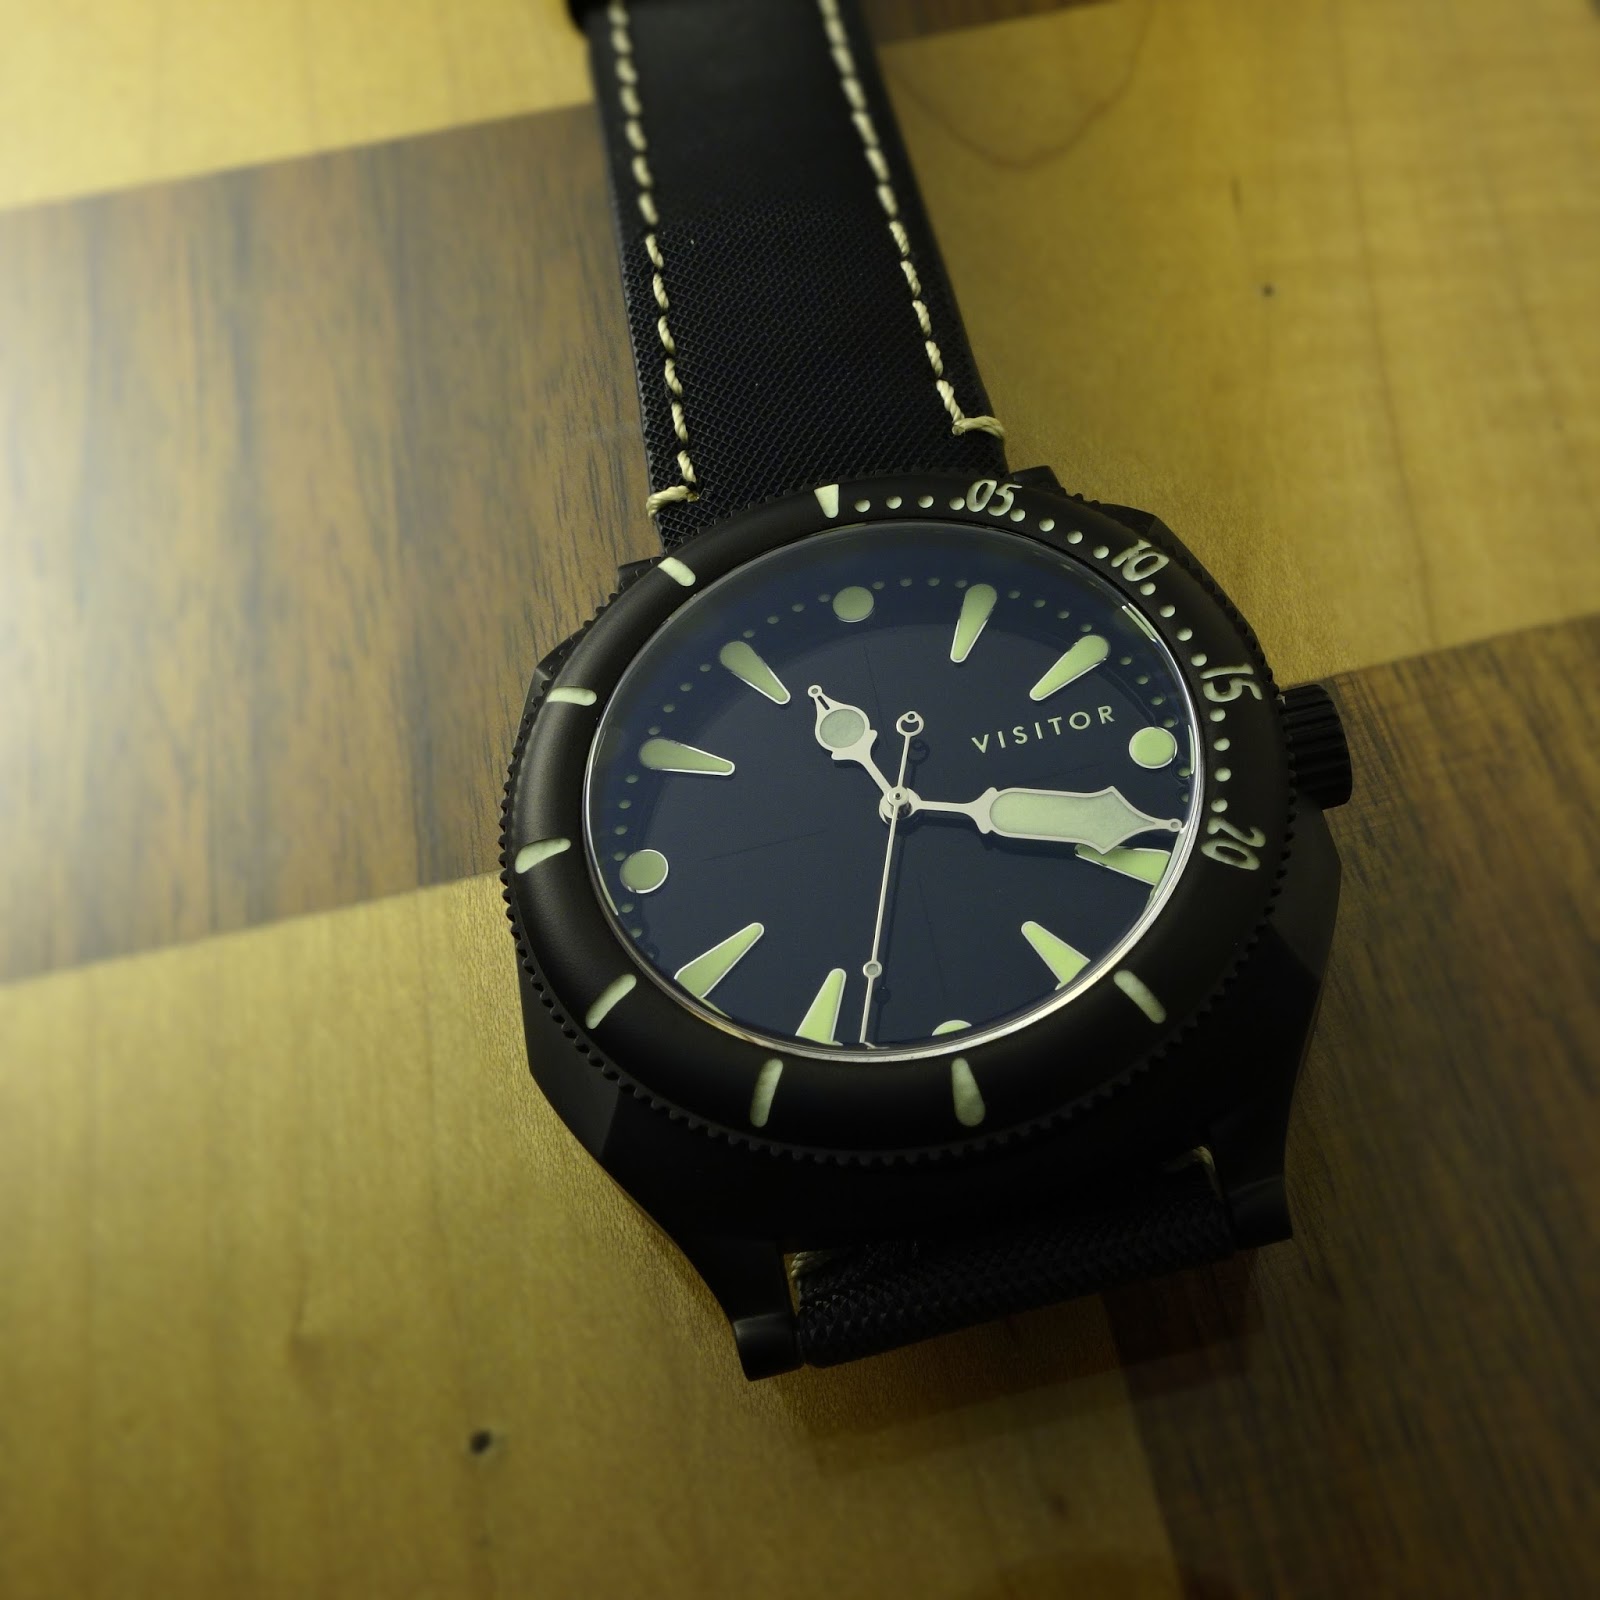 New Visitor Watches, Part 3: Blacksand